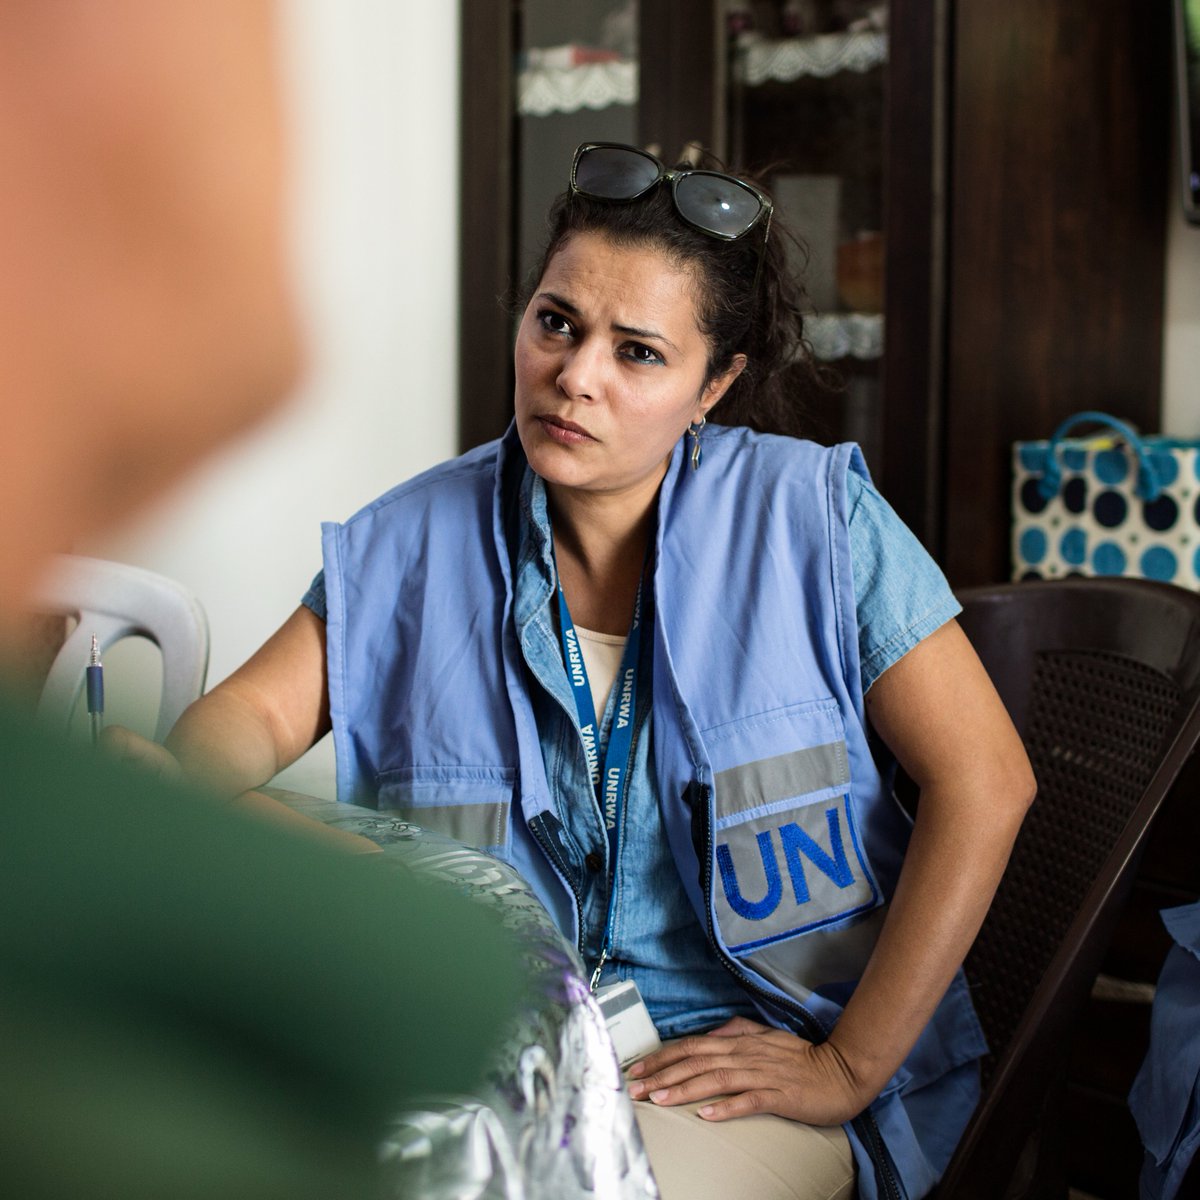 This year, 🇩🇪 vital financial assistance from #Germany enabled #UNRWA to sustain services and pay the salaries of our staff - mostly doctors, teachers, nurses, relief workers and sanitation laborers - on time every month.

#DankeDeutschland #UNRWAworks #forPalestineRefugees